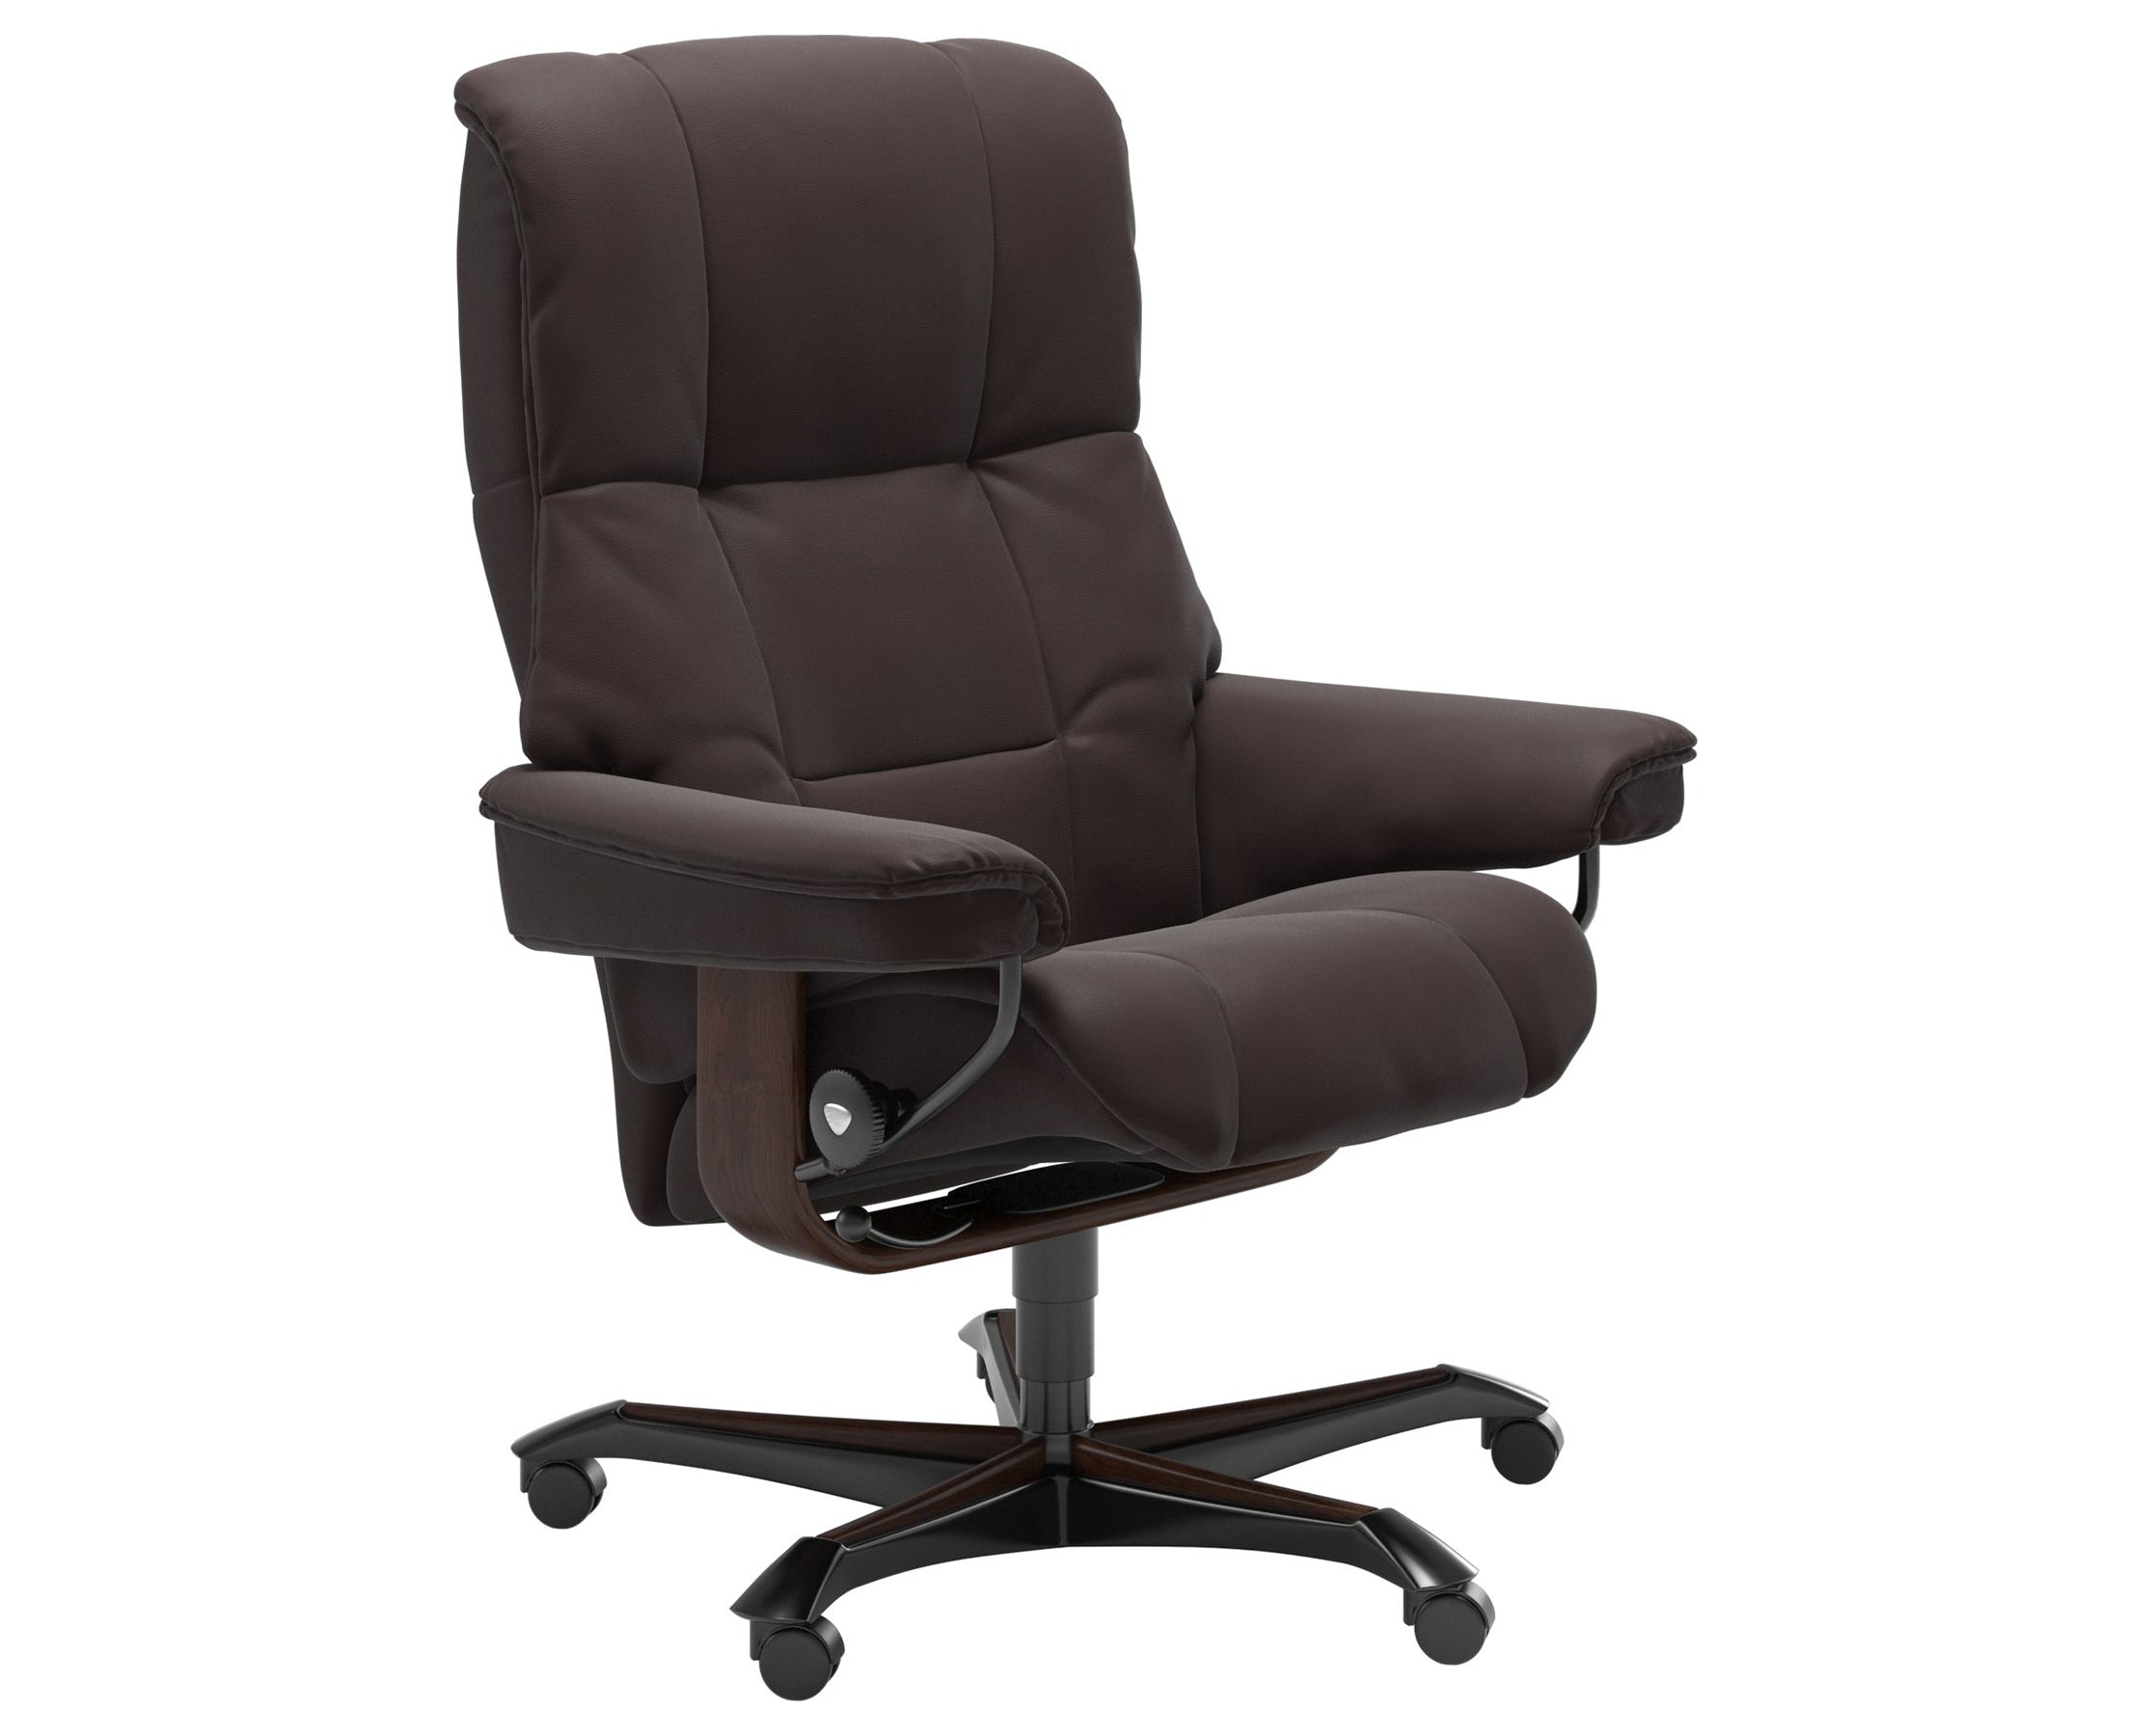 Paloma Leather Chocolate M and Brown Base | Stressless Mayfair Home Office Chair | Valley Ridge Furniture